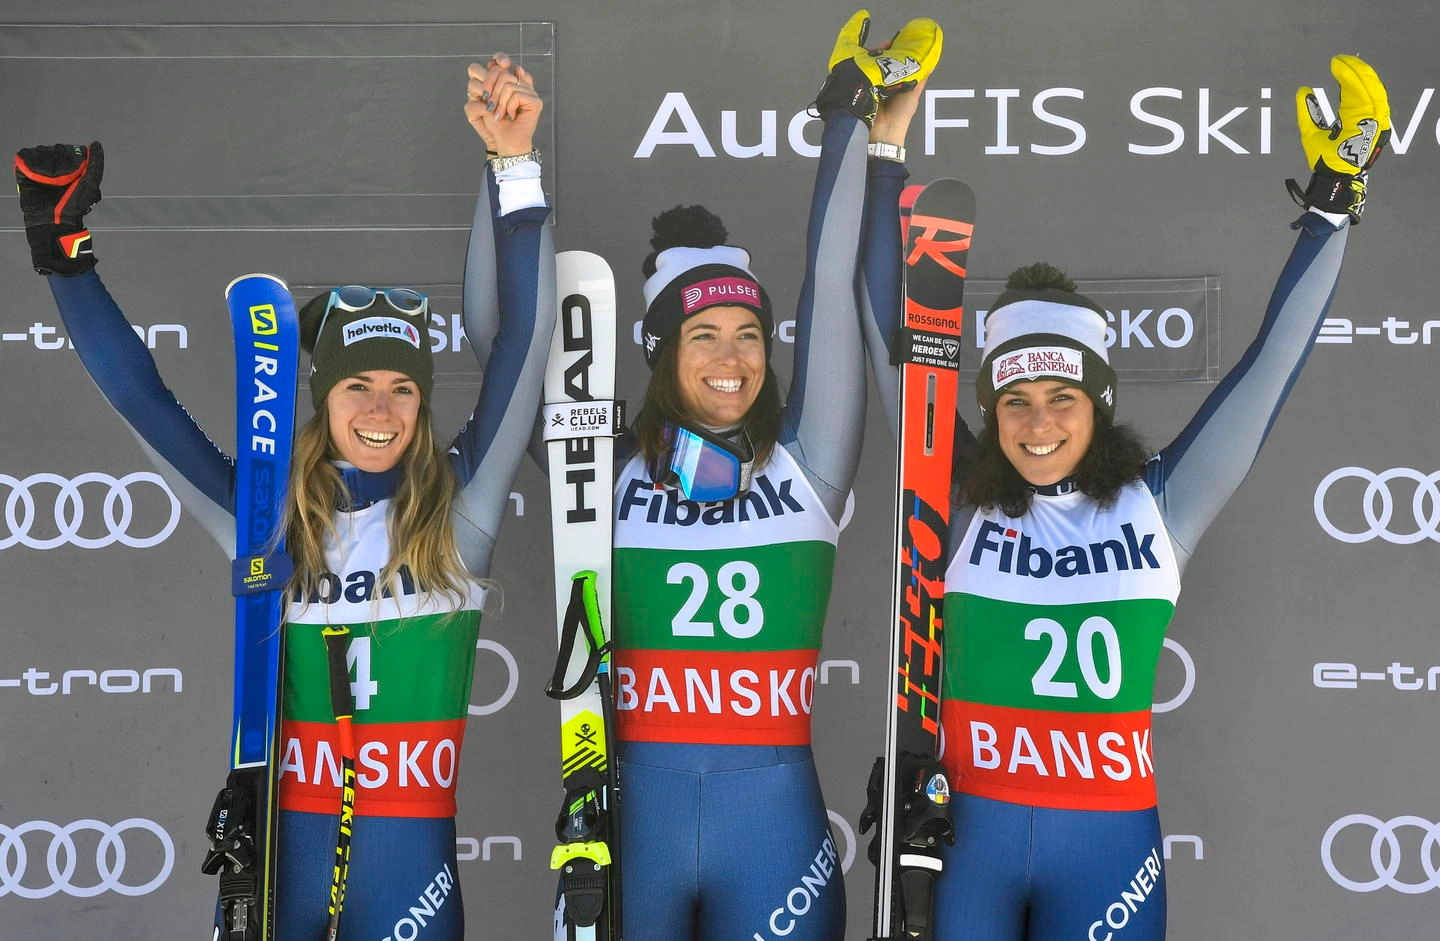 epa08162758 First placed Elena Curtoni (C), second placed Marta Bassino (L) and third placed Frederica Brignone (R) of Italy celebrate on the podium for the Women's Downhill race at the FIS Alpine Skiing World Cup in Bansko, Bulgaria on 25 January 2020.  EPA/GEORGI LICOVSKI